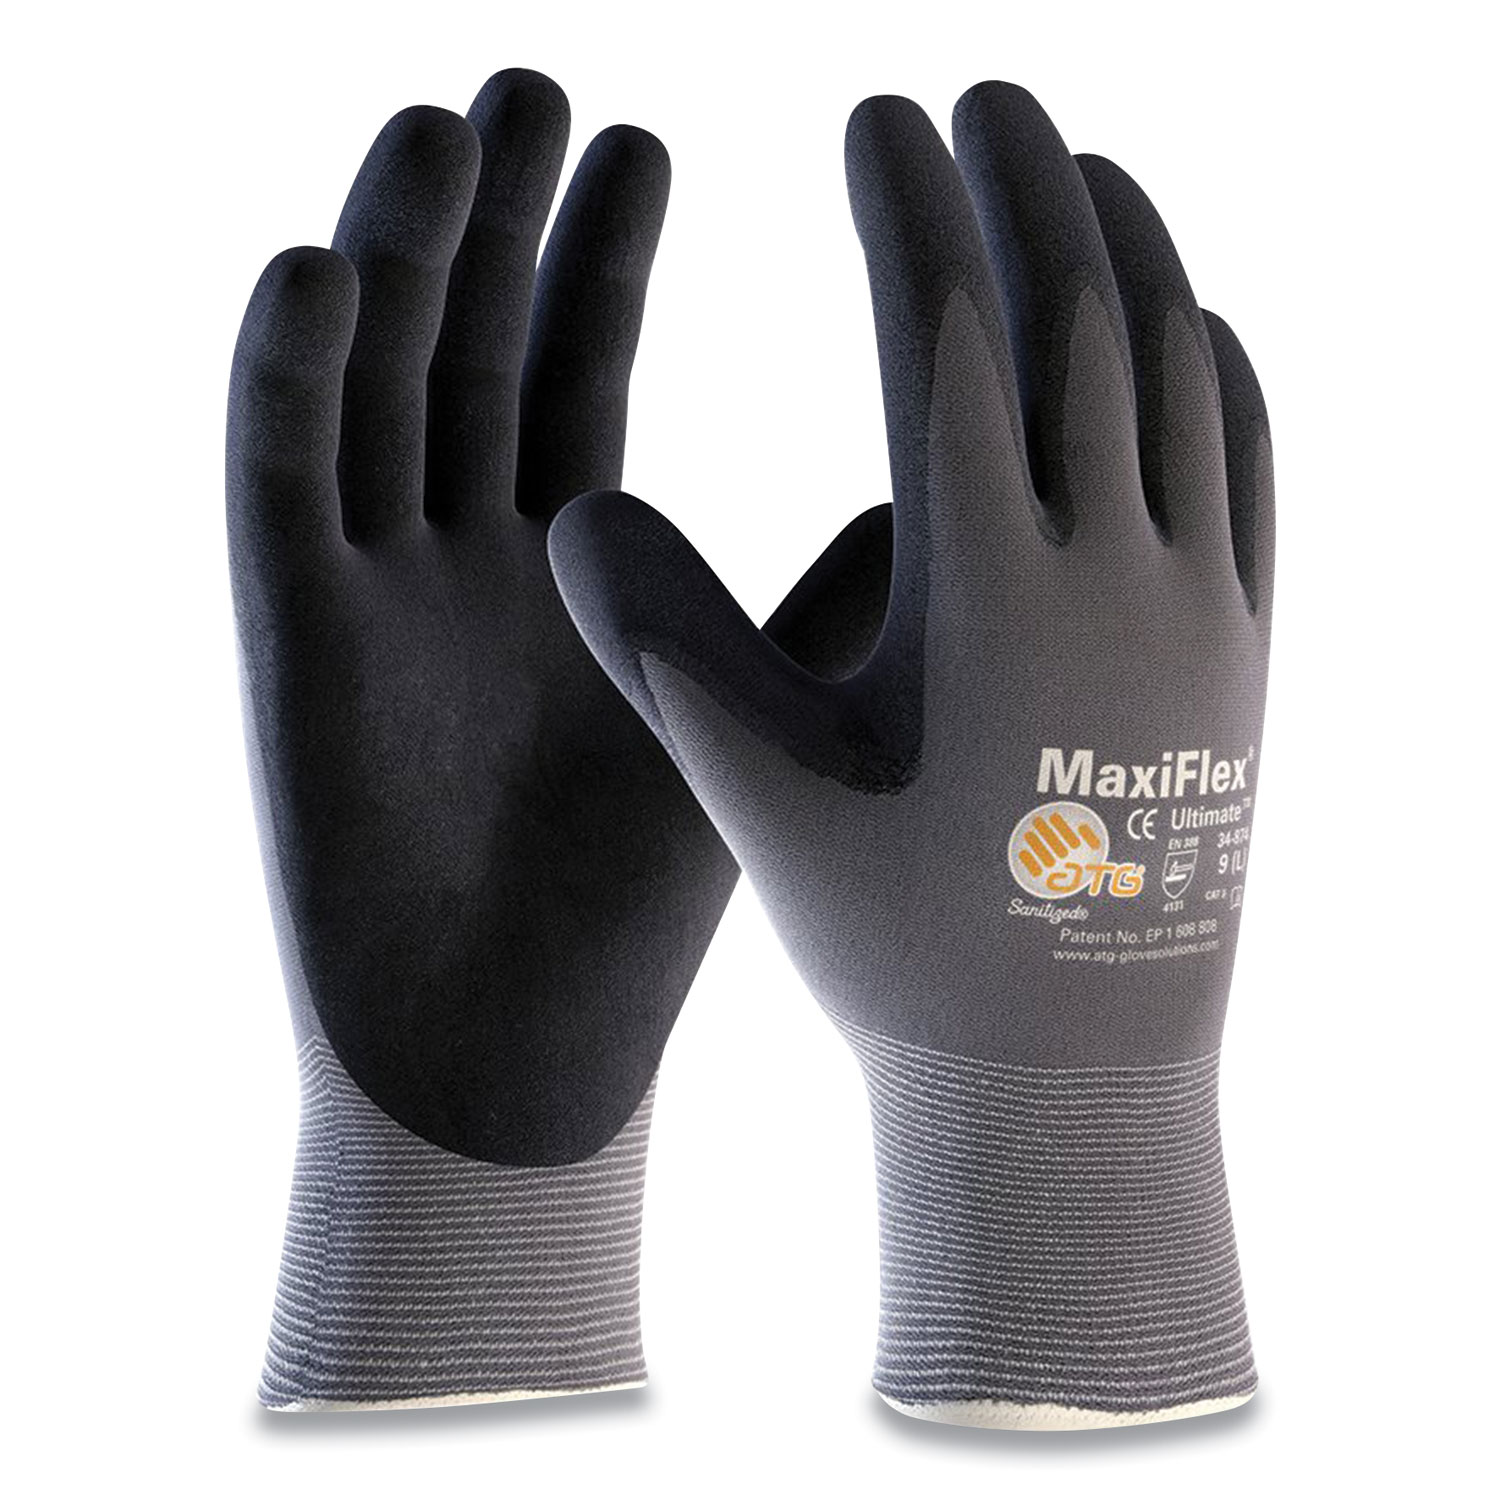  MaxiFlex 34-874/M Ultimate Seamless Knit Nylon Gloves, Nitrile Coated MicroFoam Grip on Palm and Fingers, Medium, Gray, 12 Pairs (PID179948) 